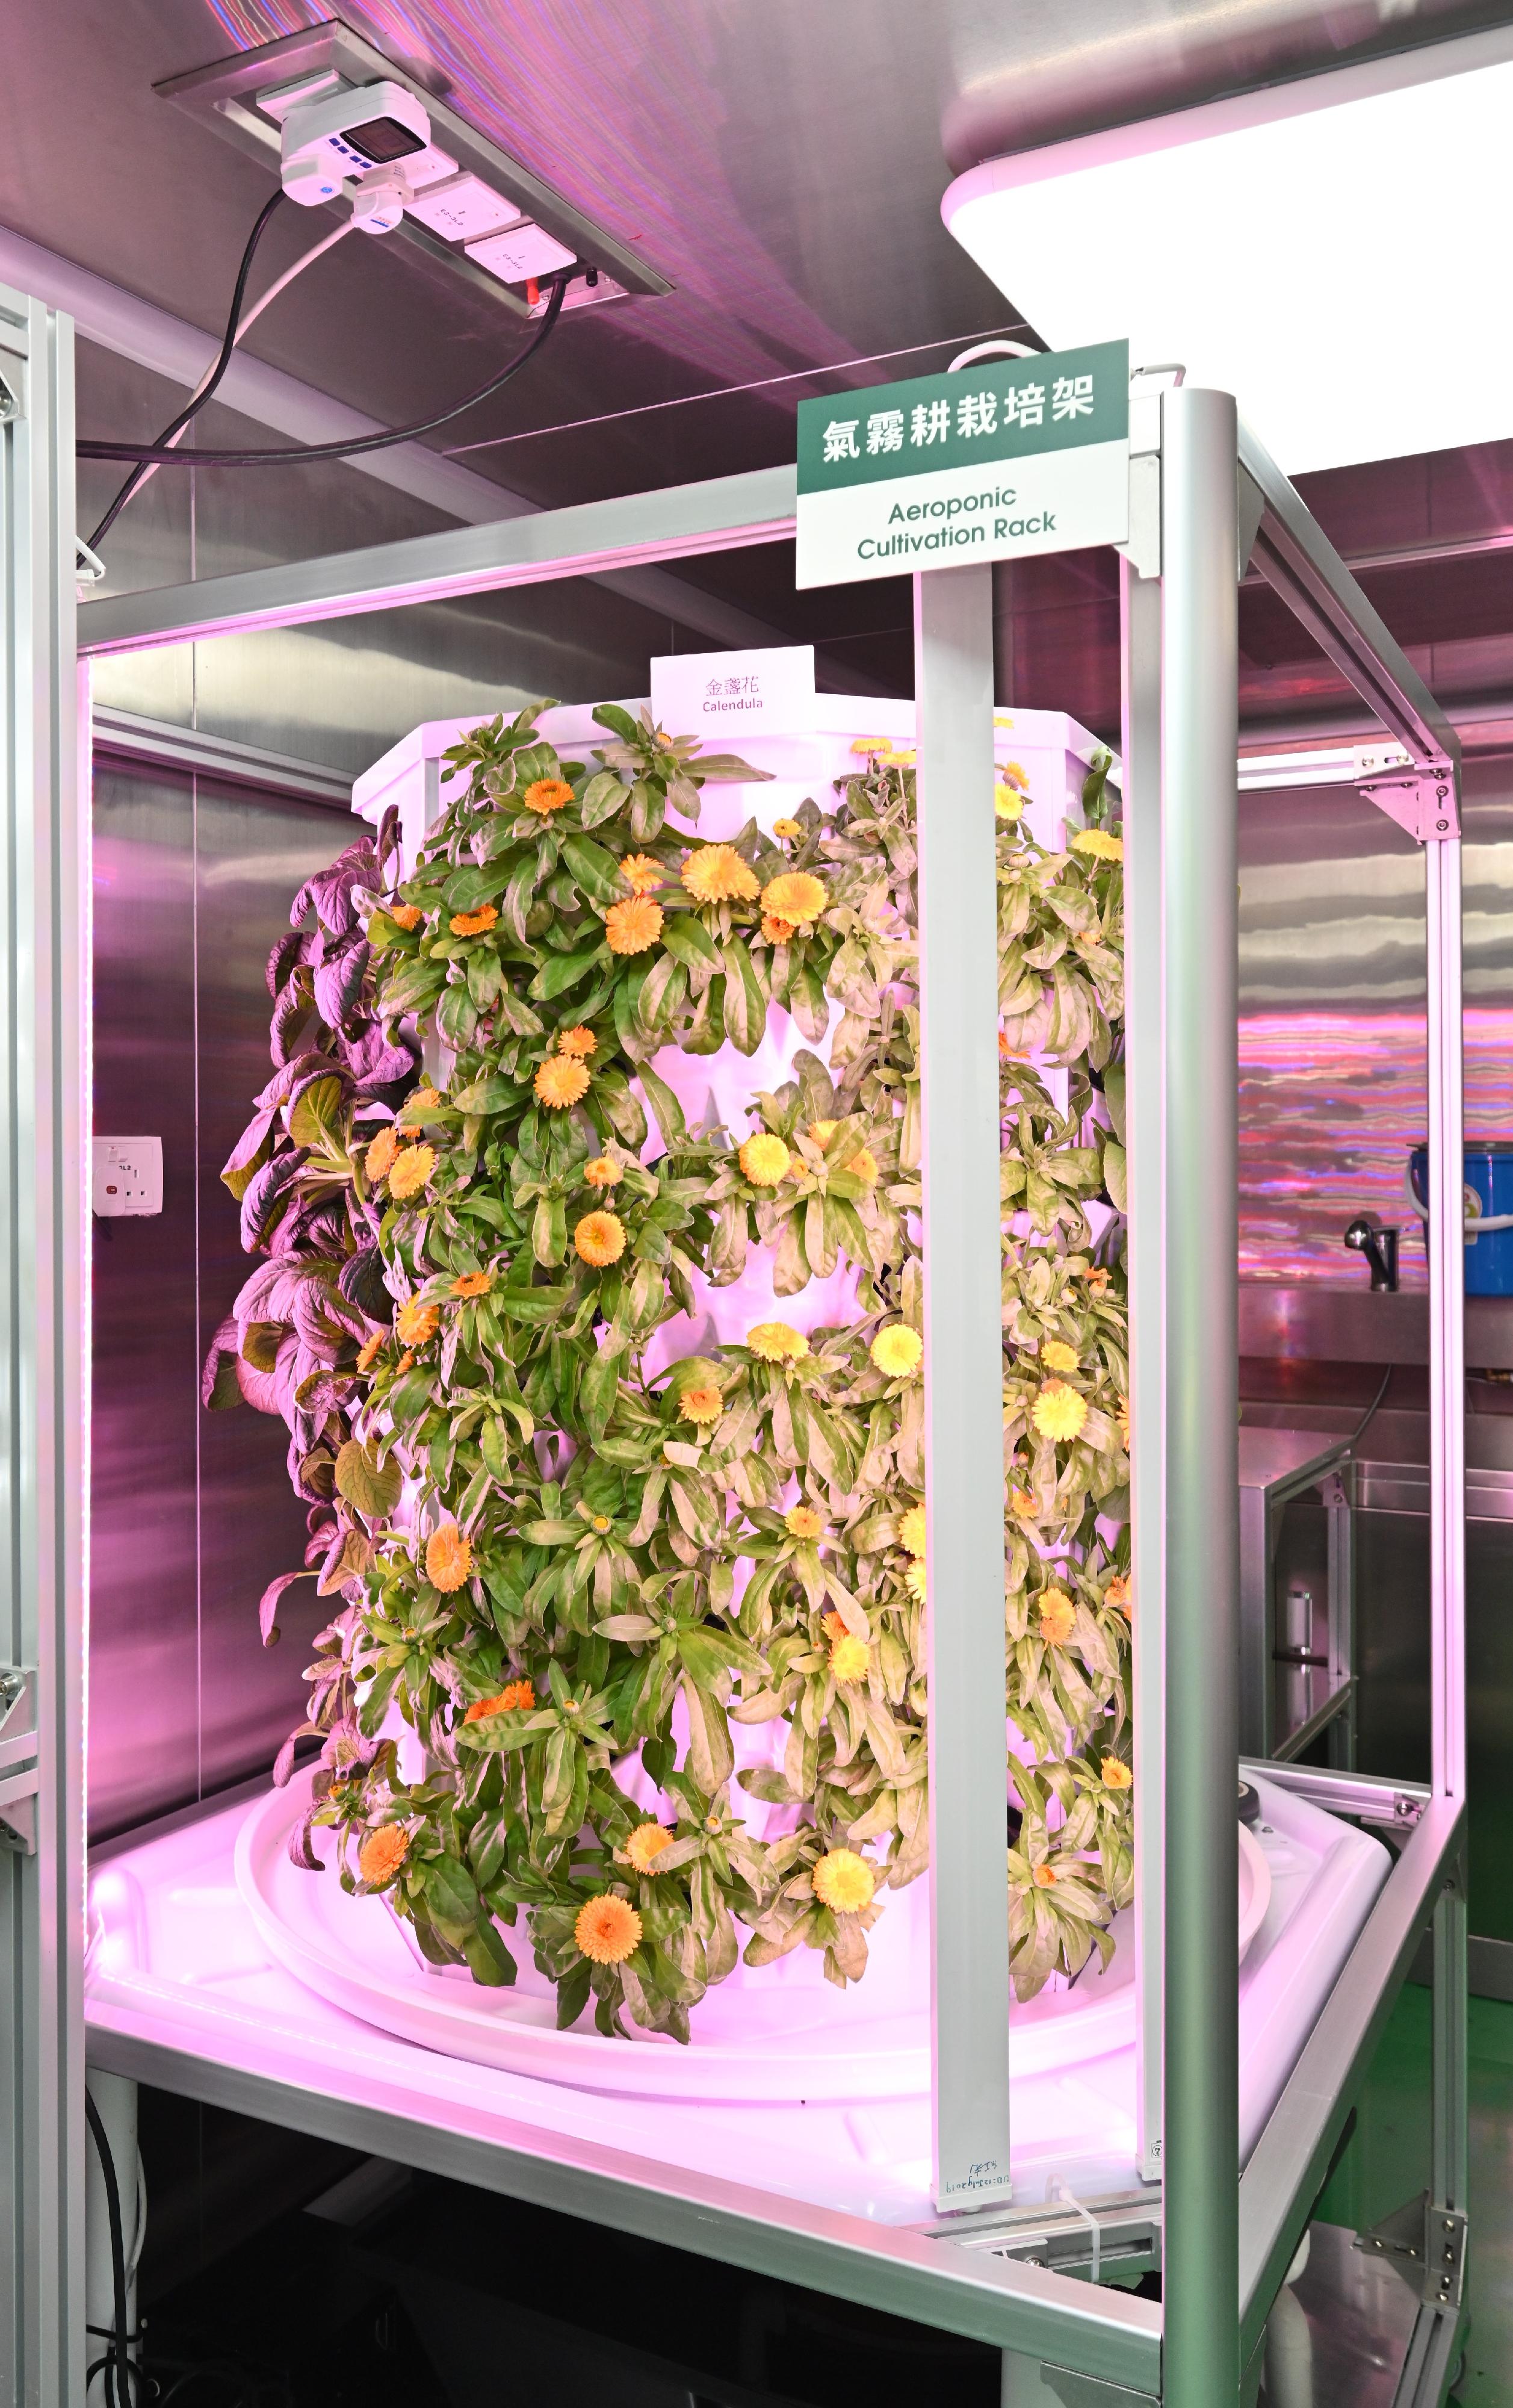 The Agriculture, Fisheries and Conservation Department and Phase 2 of the Controlled Environment Hydroponic Research and Development Centre today (July 26) showcased newly introduced hydroponic cultivation technologies as well as crops that were successfully cultivated with controlled environment hydroponic technology. Photo shows the rotary Aeroponic Cultivation System.